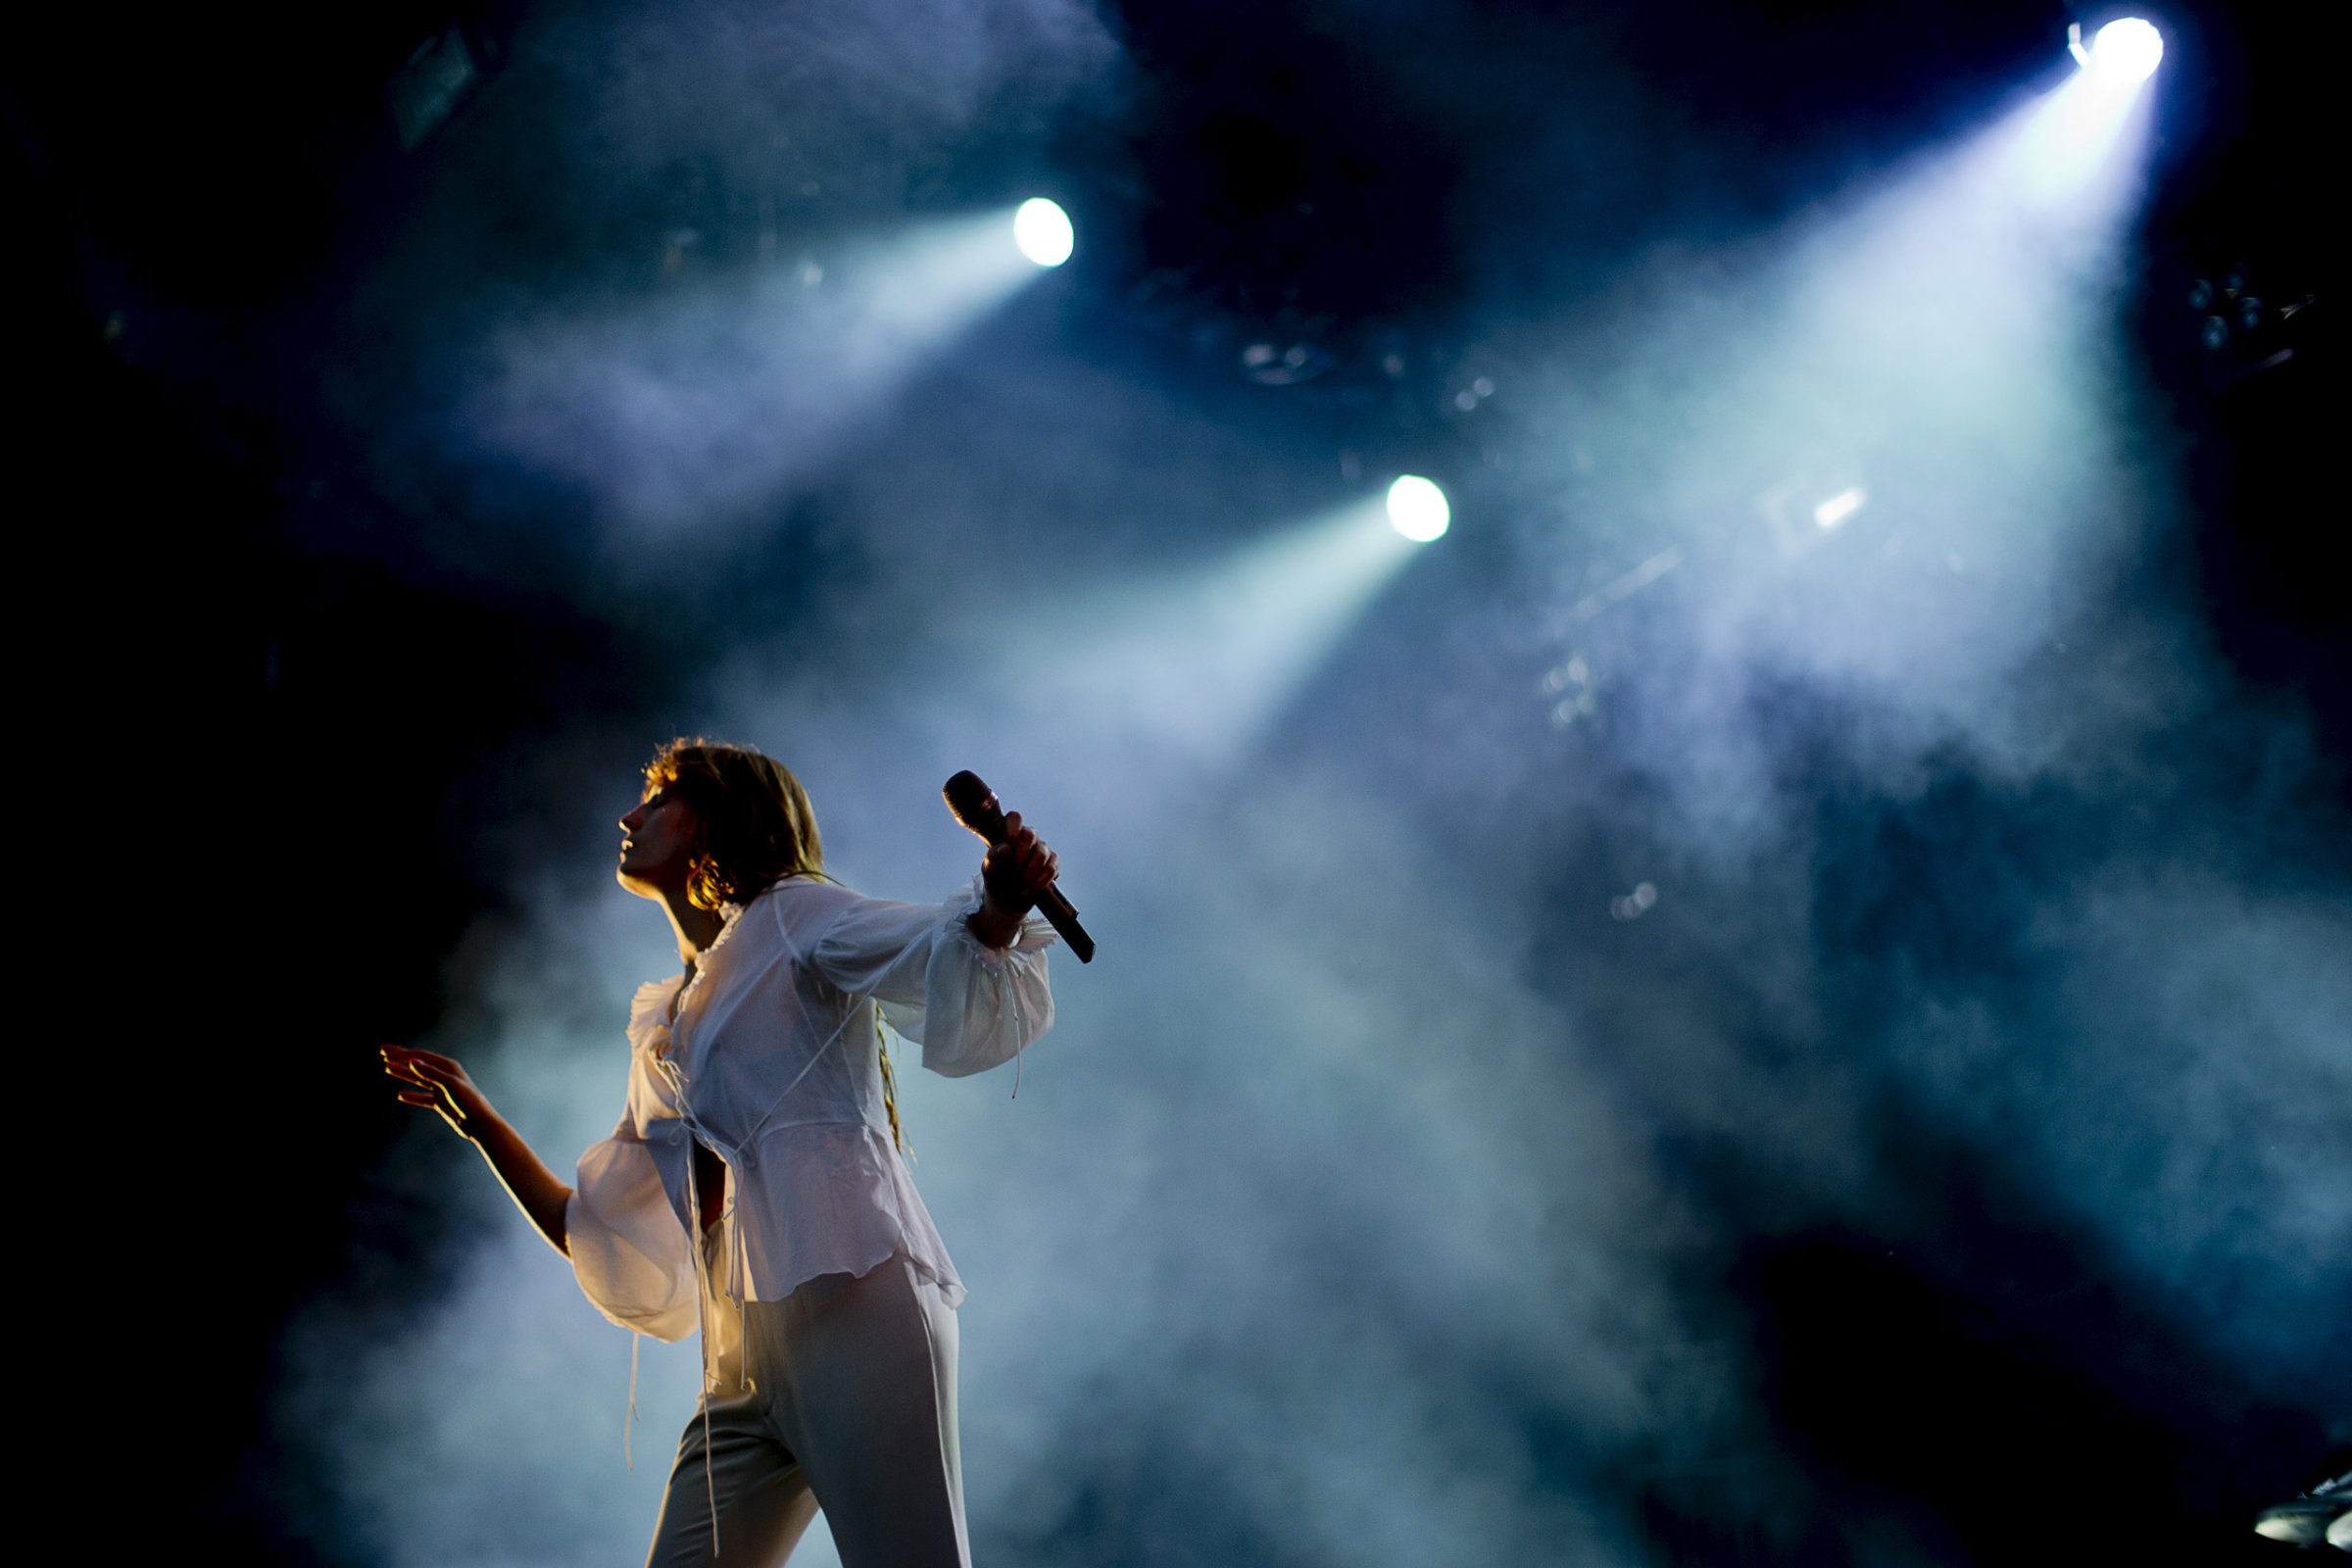 British band Florence and the Machine performs during the Way Out West rock festival in Gothenburg, Sweden, August 14, 2015. REUTERS/Adam Ihse/TT News AgencyATTENTION EDITORS - THIS IMAGE WAS PROVIDED BY A THIRD PARTY. THIS PICTURE IS DISTRIBUTED EXACTLY AS RECEIVED BY REUTERS, AS A SERVICE TO CLIENTS. FOR EDITORIAL USE ONLY. NOT FOR SALE FOR MARKETING OR ADVERTISING CAMPAIGNS. SWEDEN OUT. NO COMMERCIAL OR EDITORIAL SALES IN SWEDEN. NO COMMERCIAL SALES. - RTX1OBTS